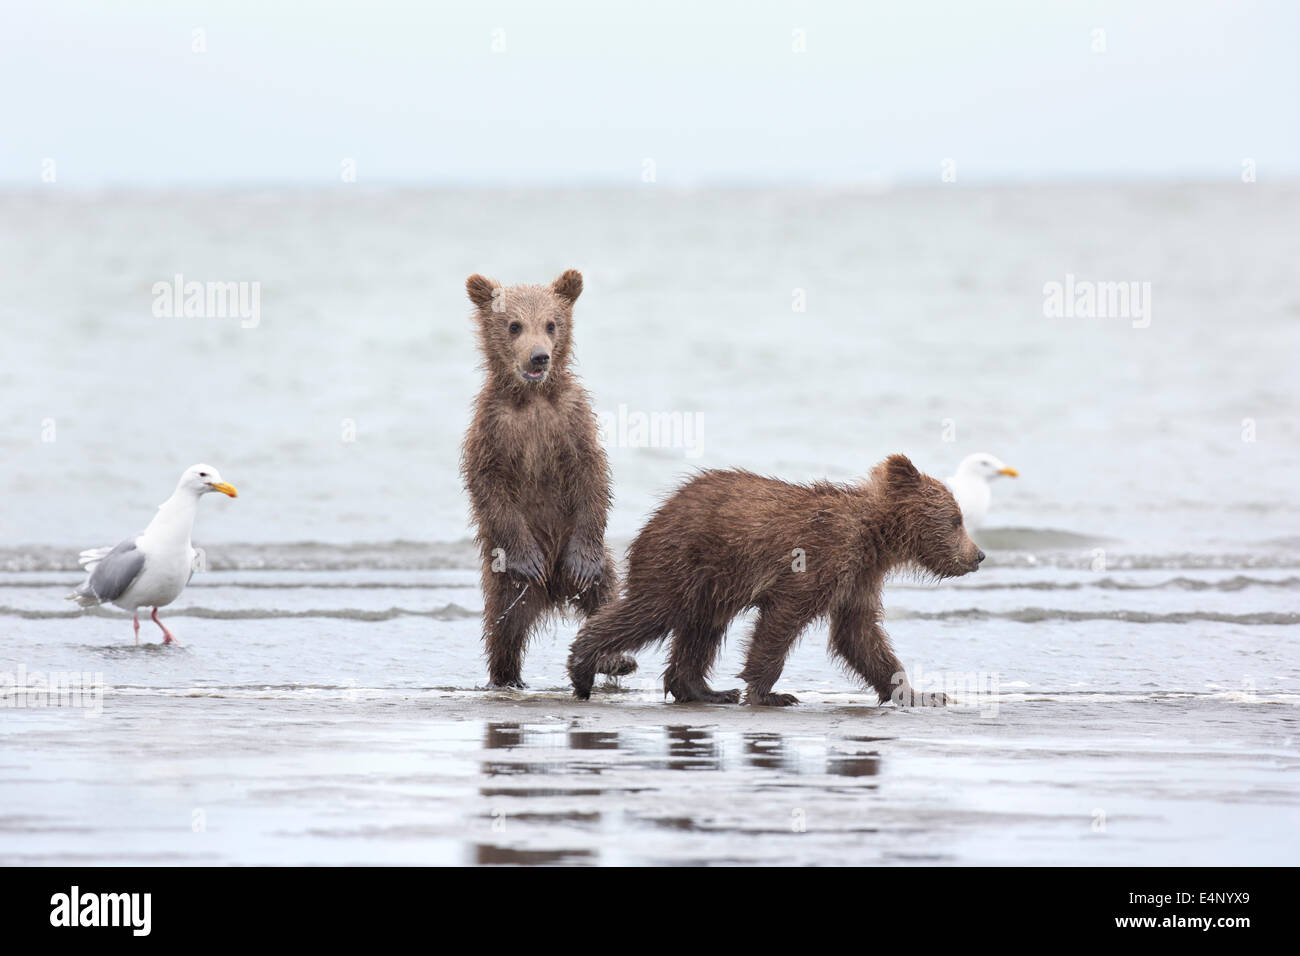 Four-month-old grizzly bear cubs on seashore in Alaska Stock Photo